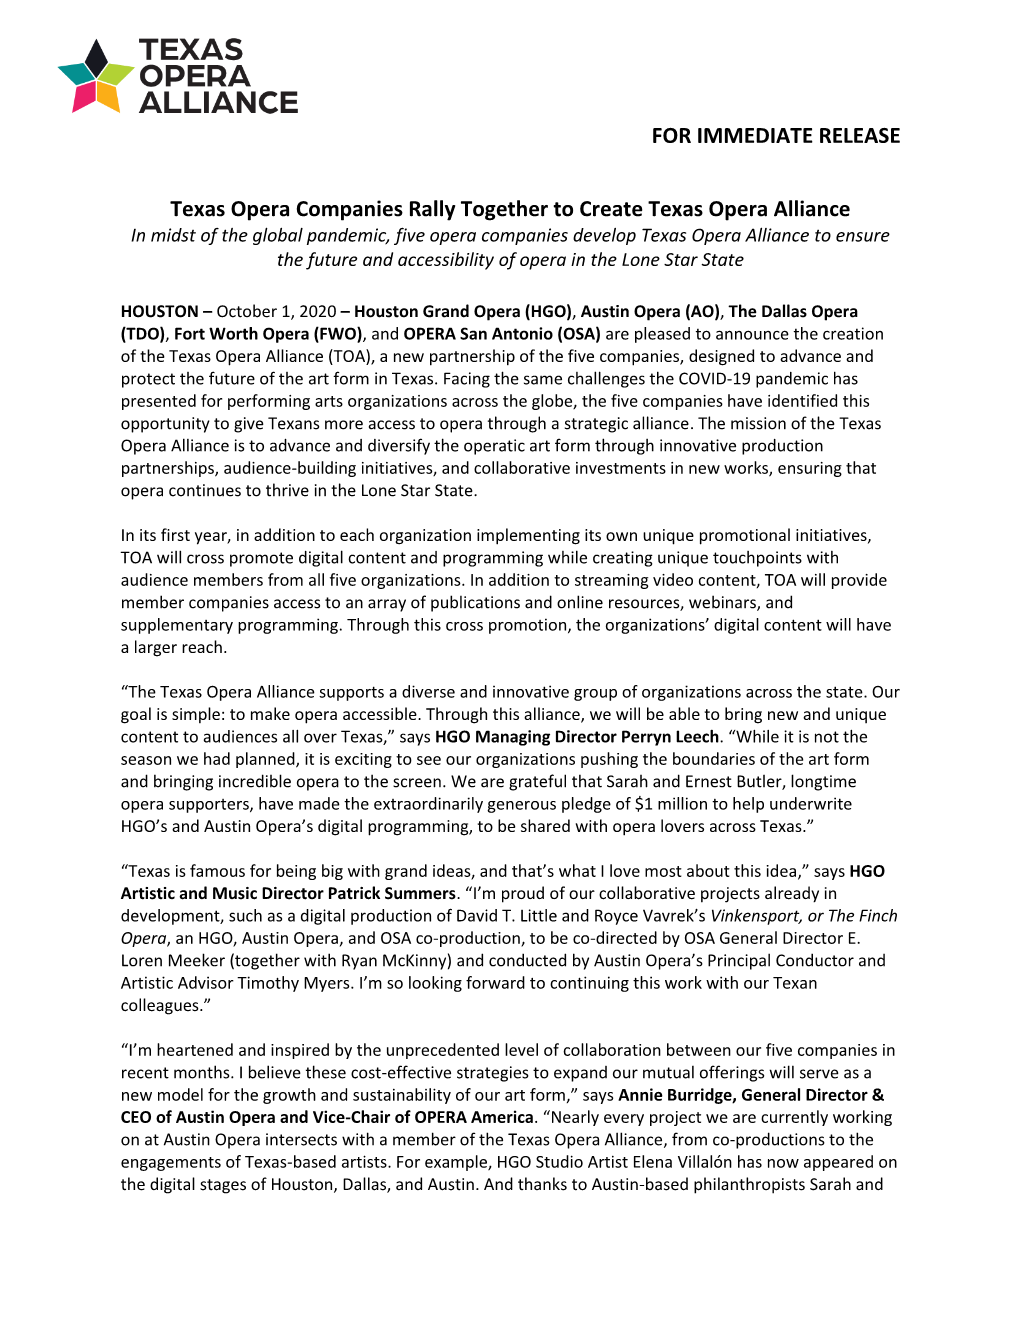 FOR IMMEDIATE RELEASE Texas Opera Companies Rally Together